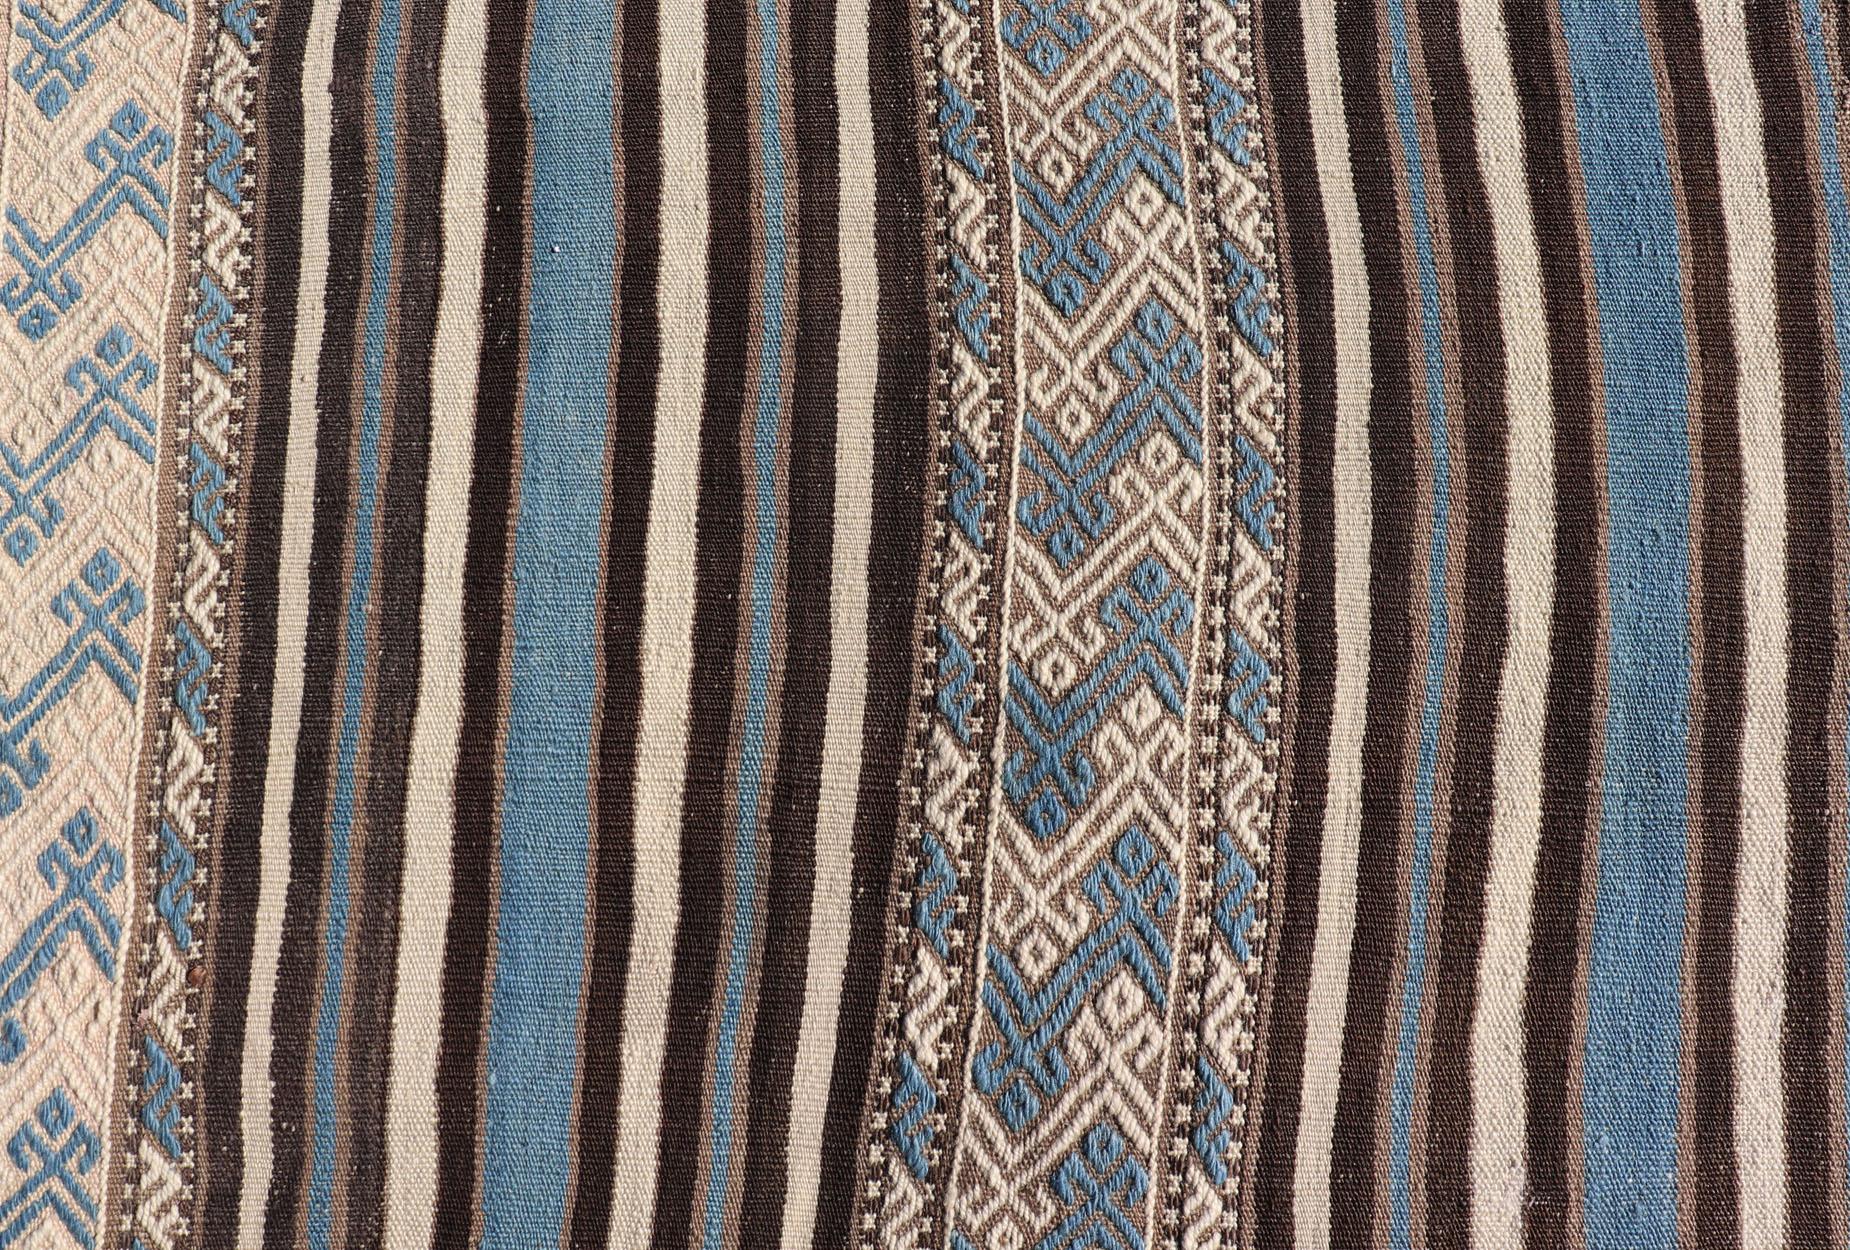 Turkish Vintage Flat-Weave with Striped Design and Tribal Motifs in Blue & Brown For Sale 3